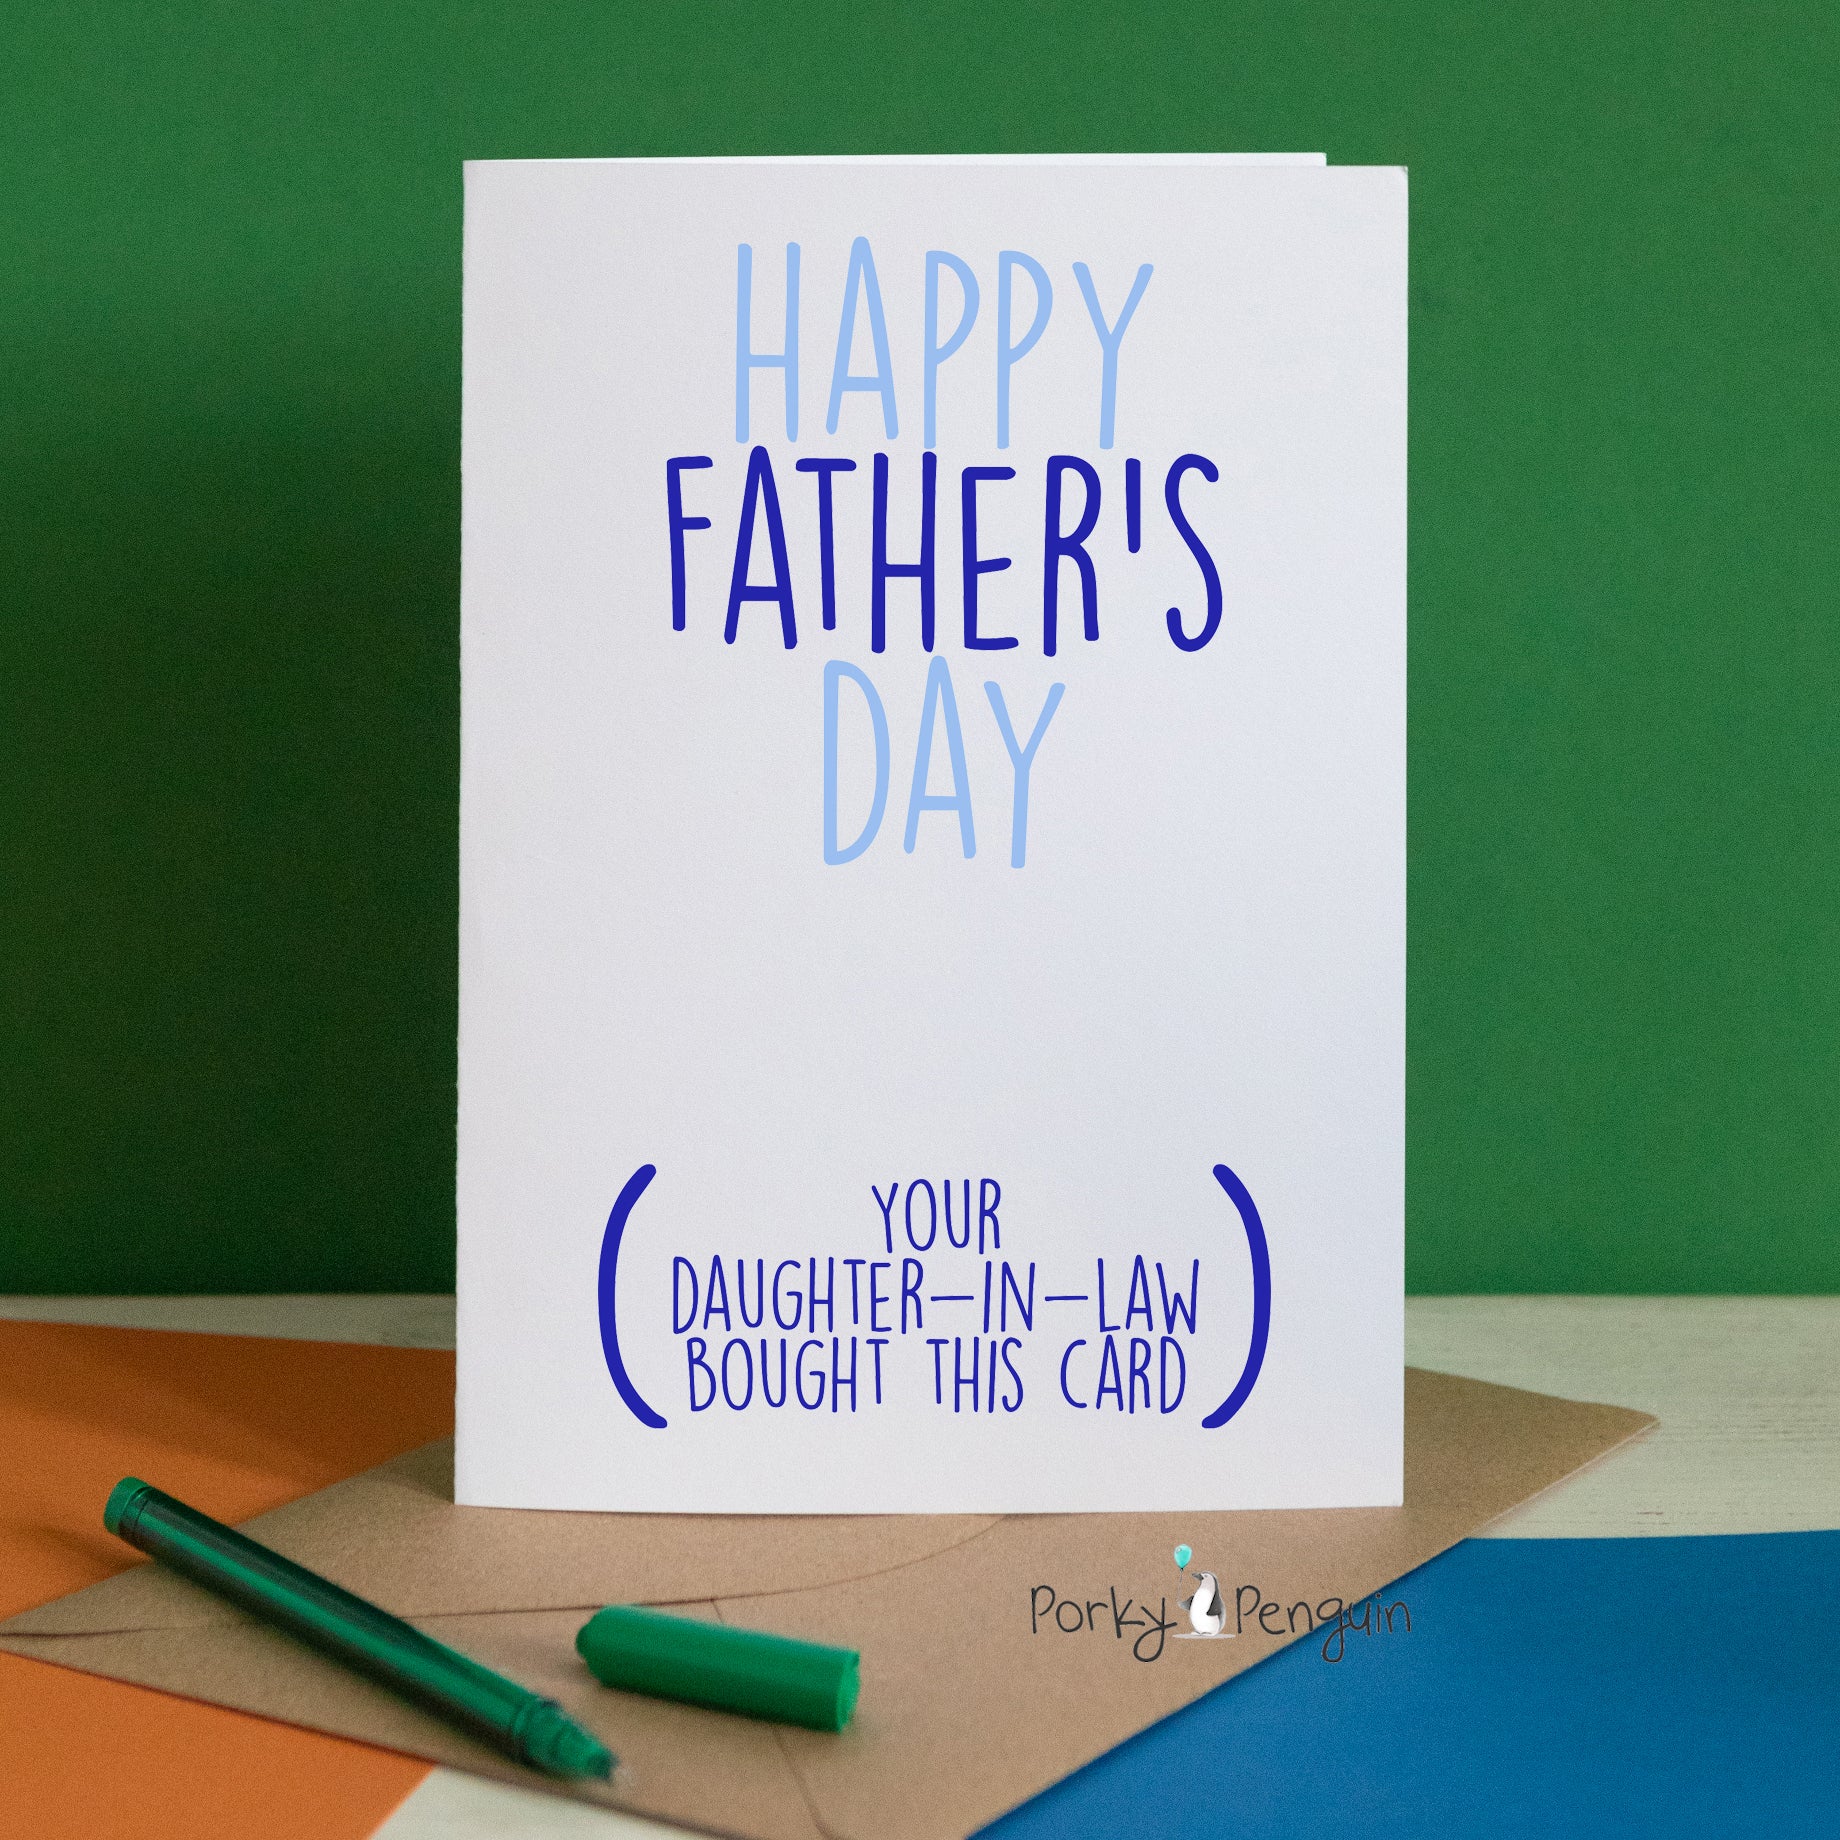 Your Daughter In Law Bought This Card!